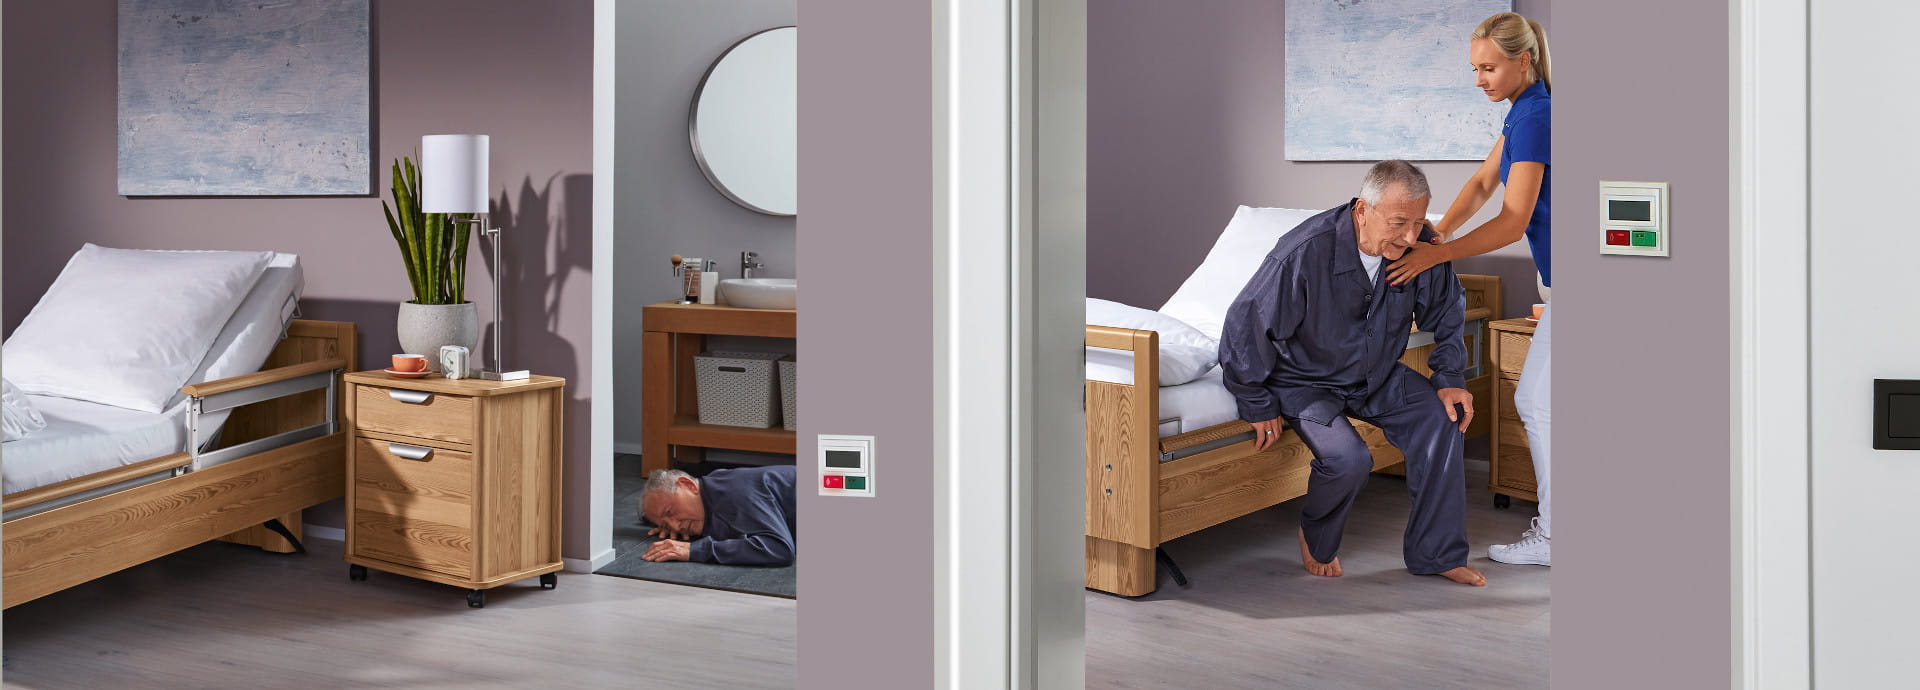 Sustainable fall prevention for utmost safety. This is what the SafeSense® bed exit assistance system of wissner-bosserhoff stands for.